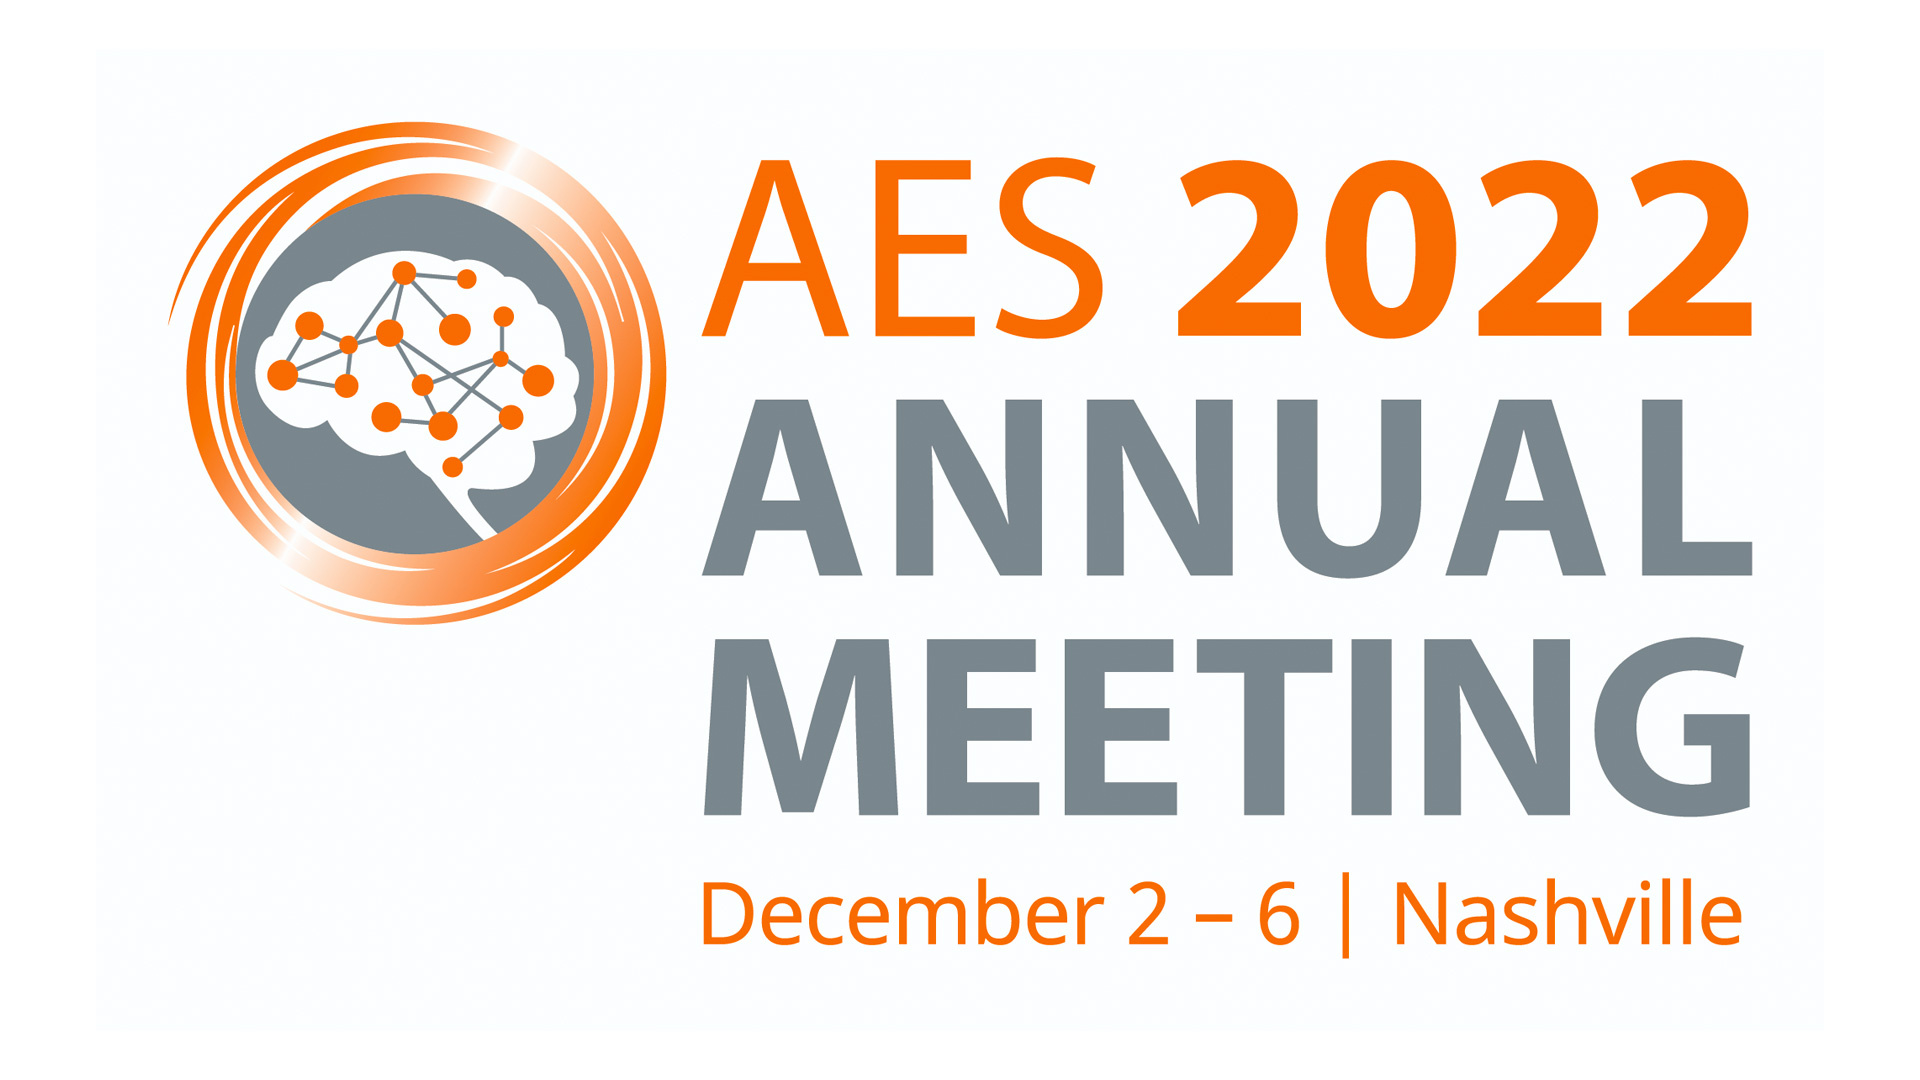 AES Annual Meeting 2022